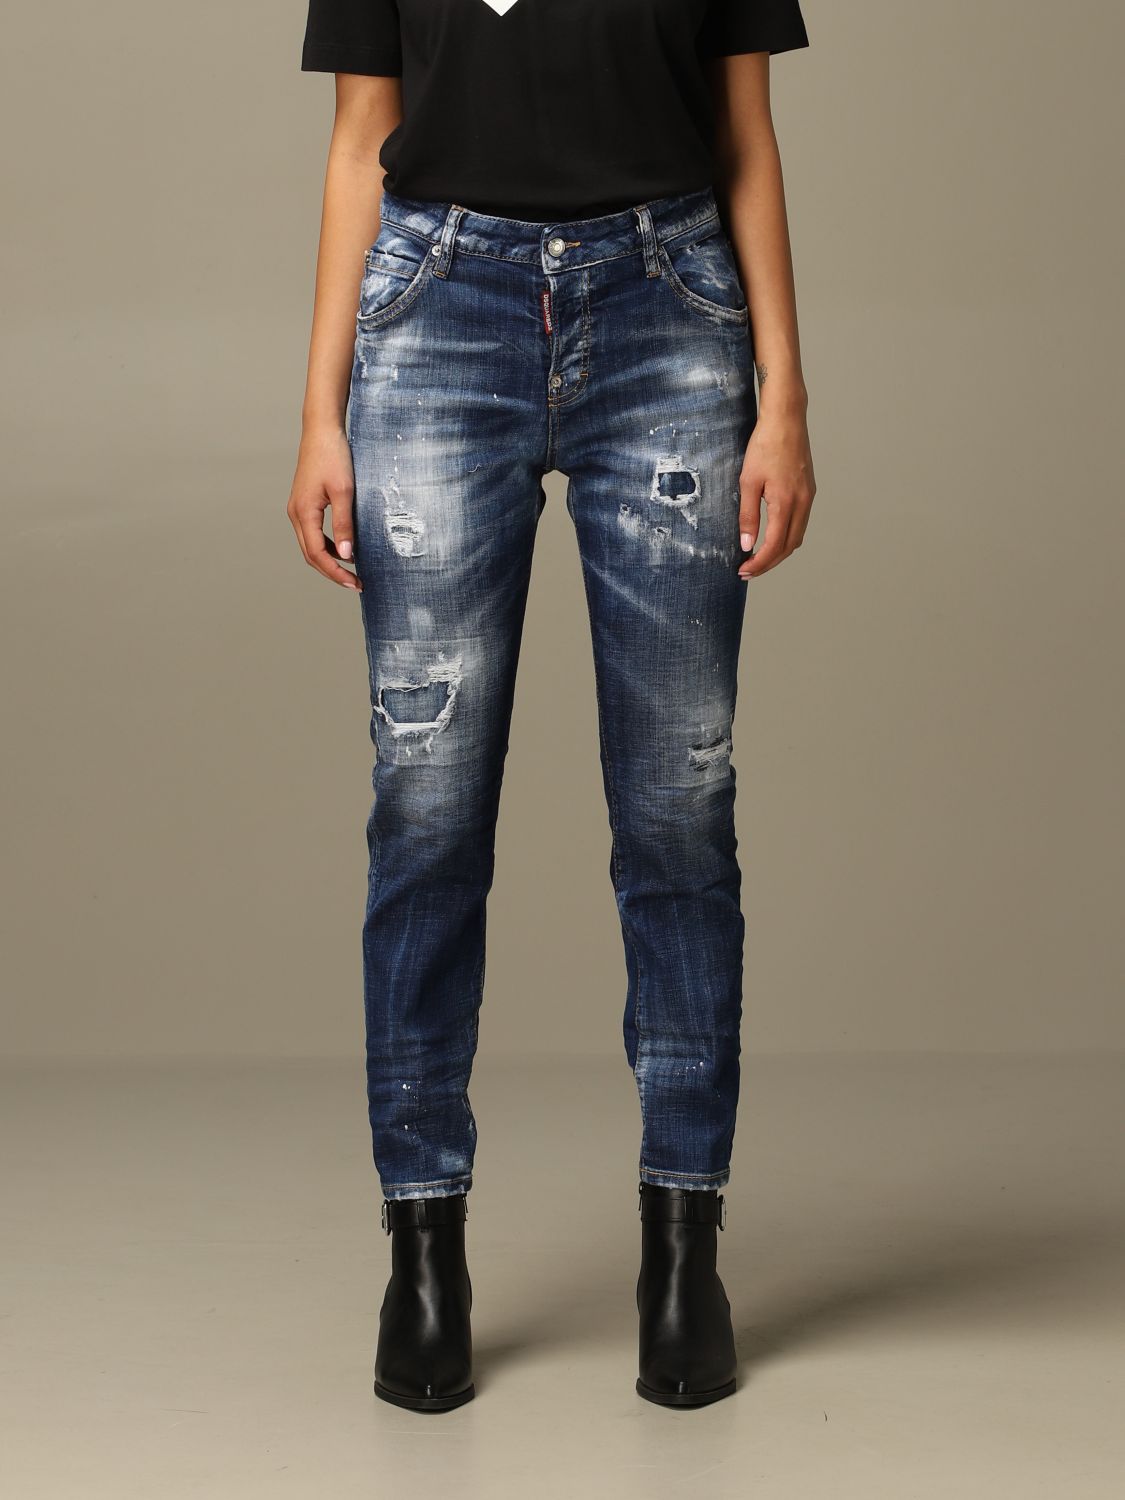 dsquared2 jeans girl